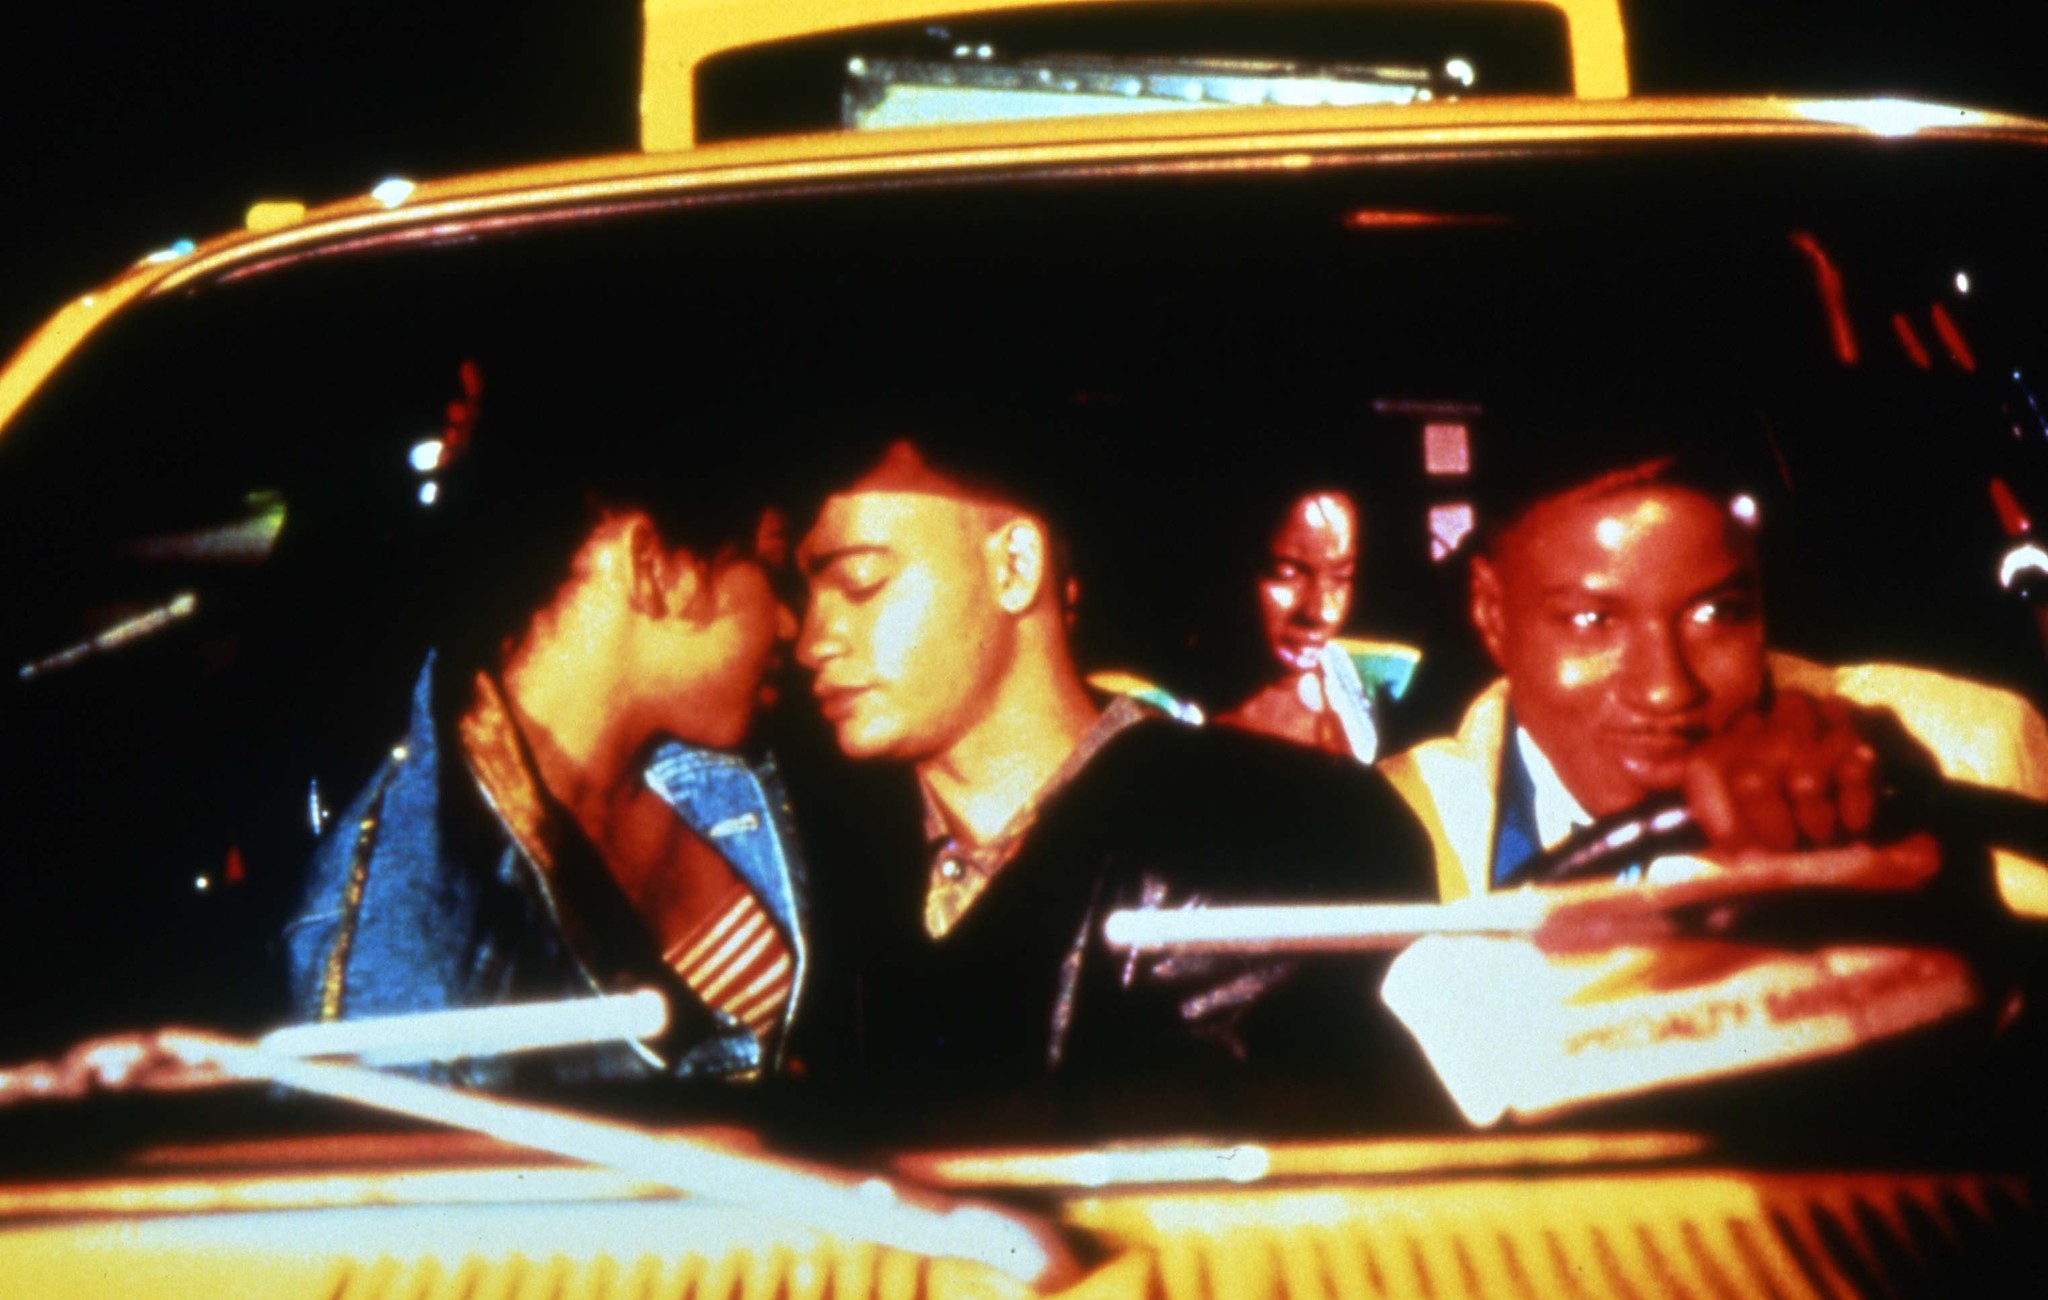 House Party (1990) Screenshot 1 